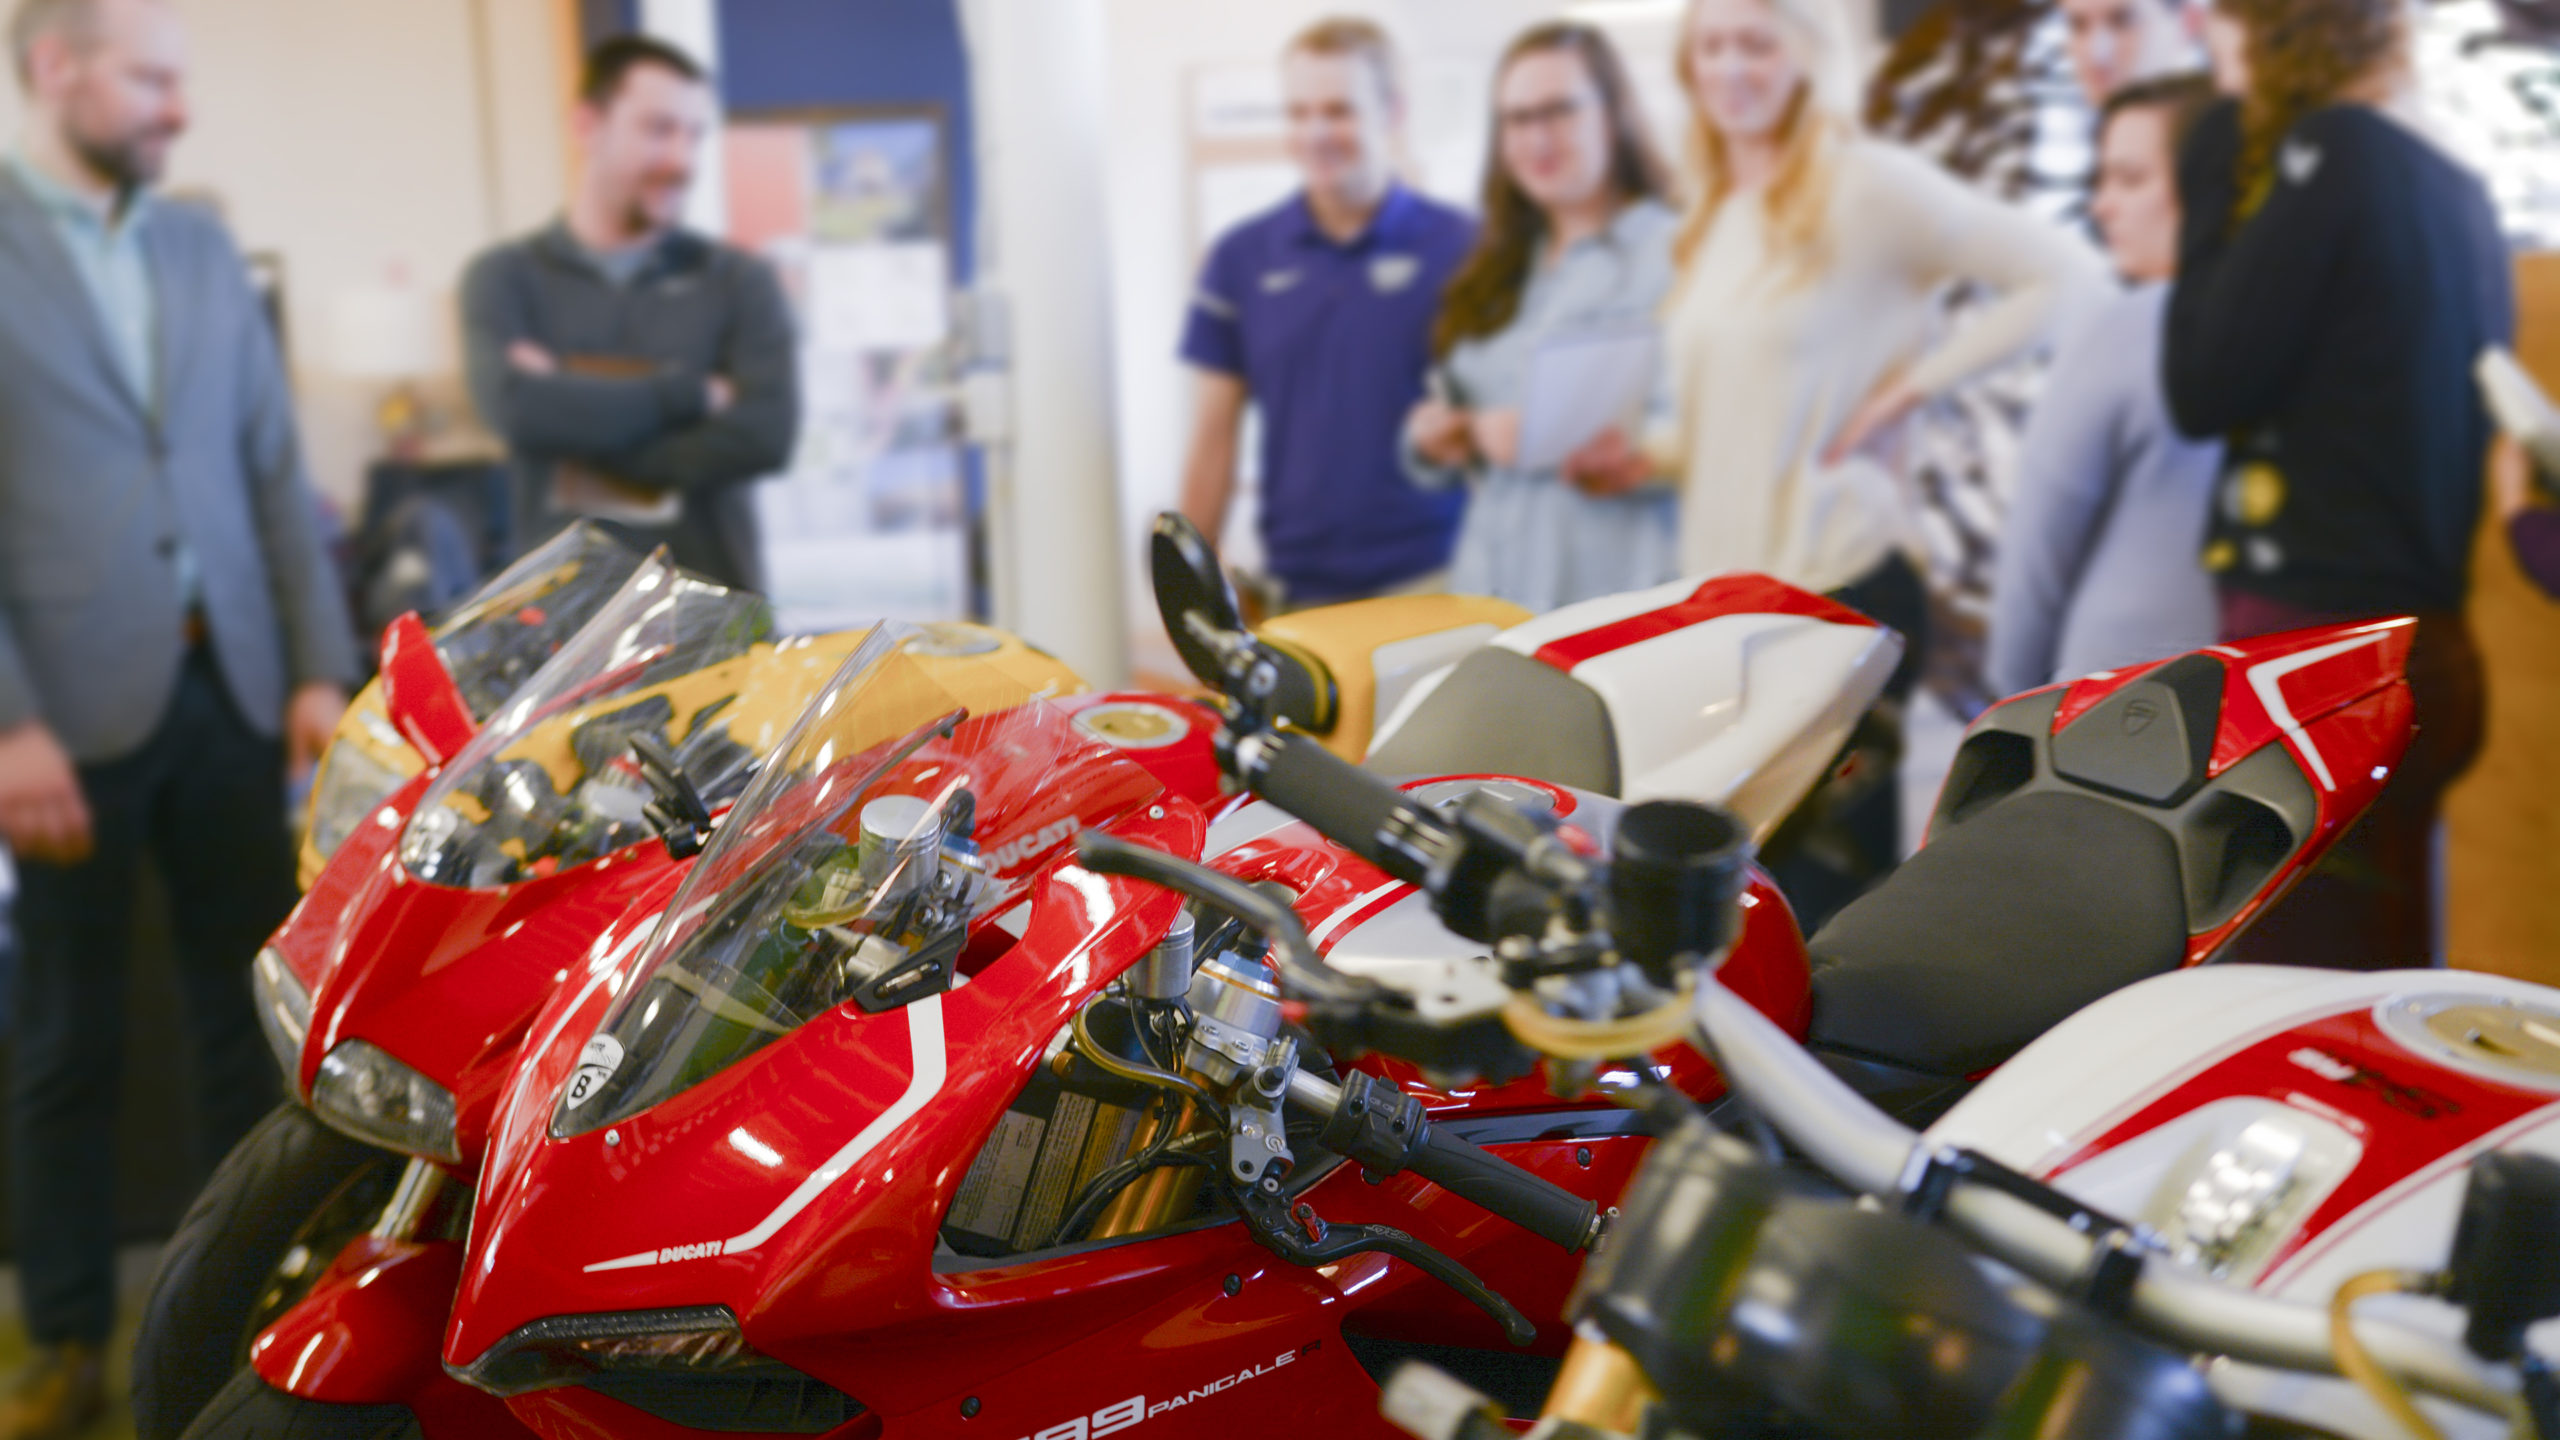 Ducatis I PLACE | Image 5/11